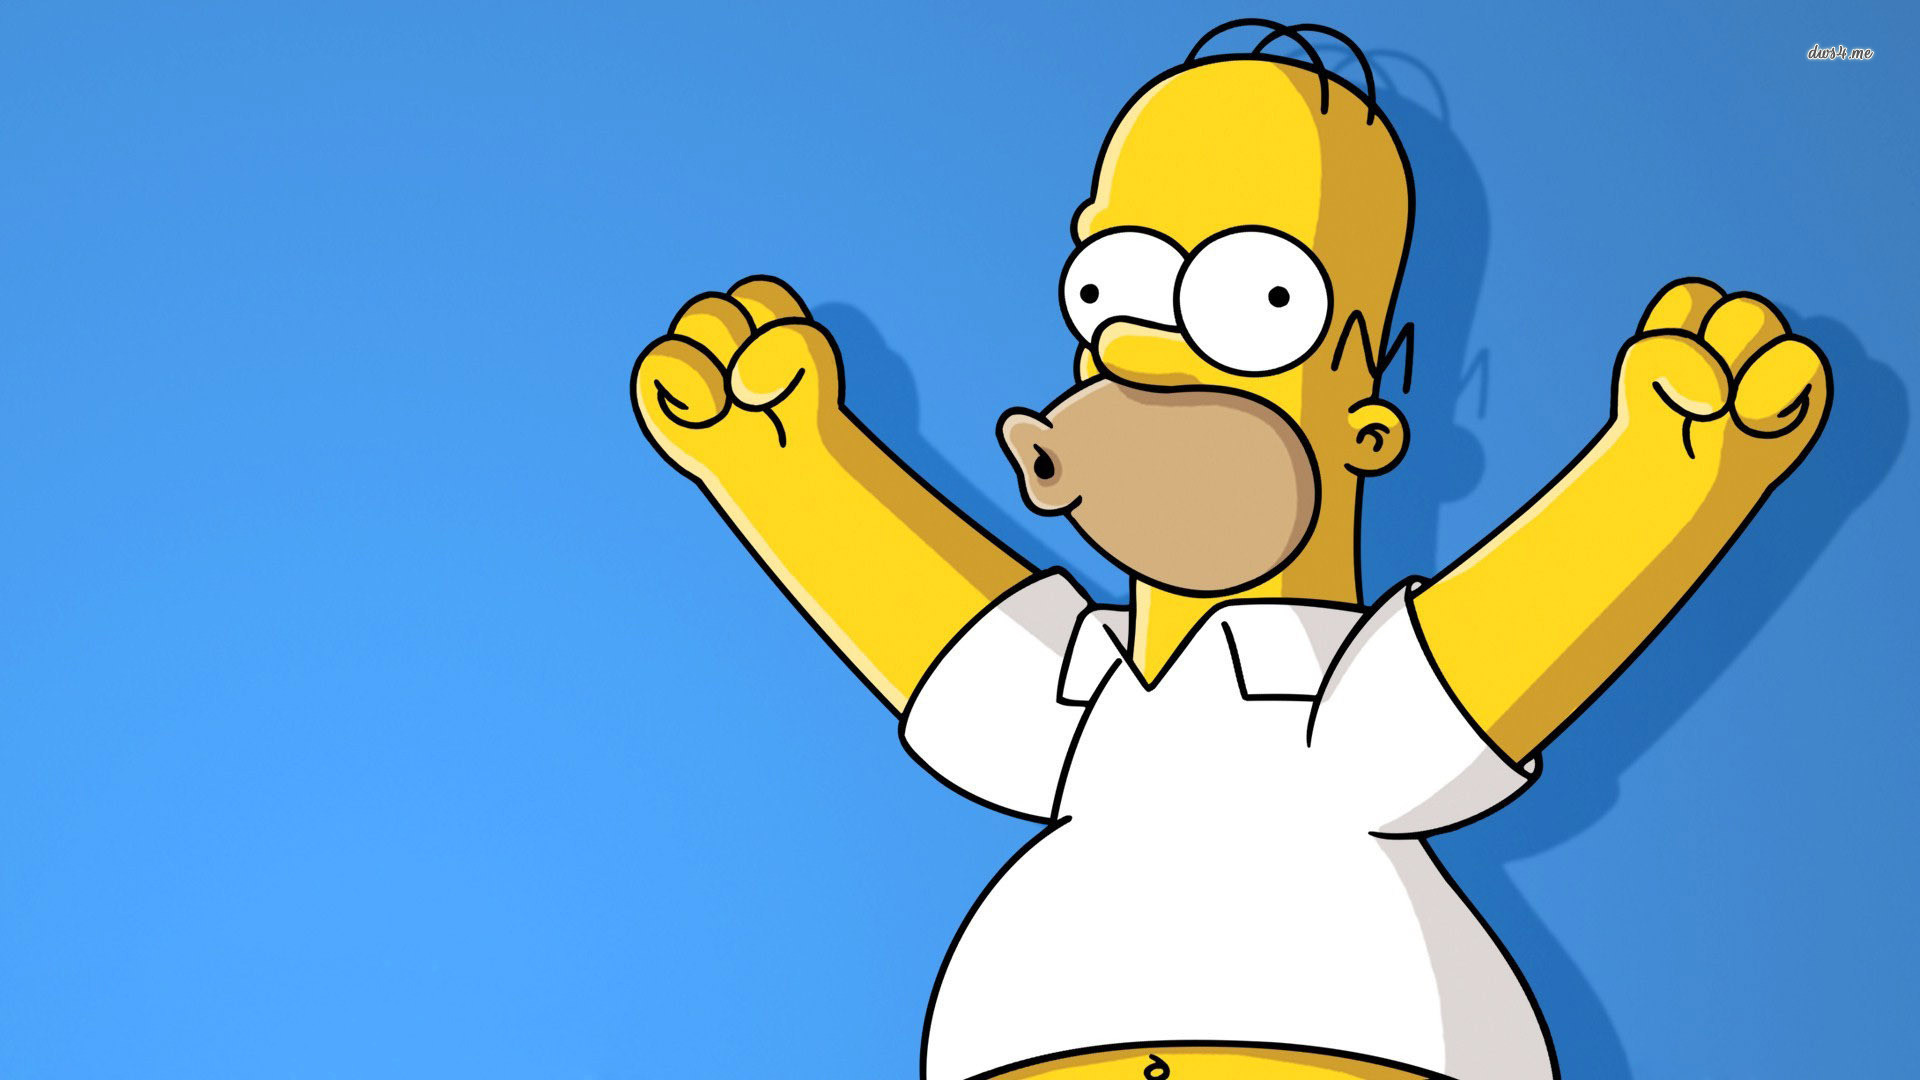 1920x1080 I got: Homer Simpson! What member of the simpsons family are you?